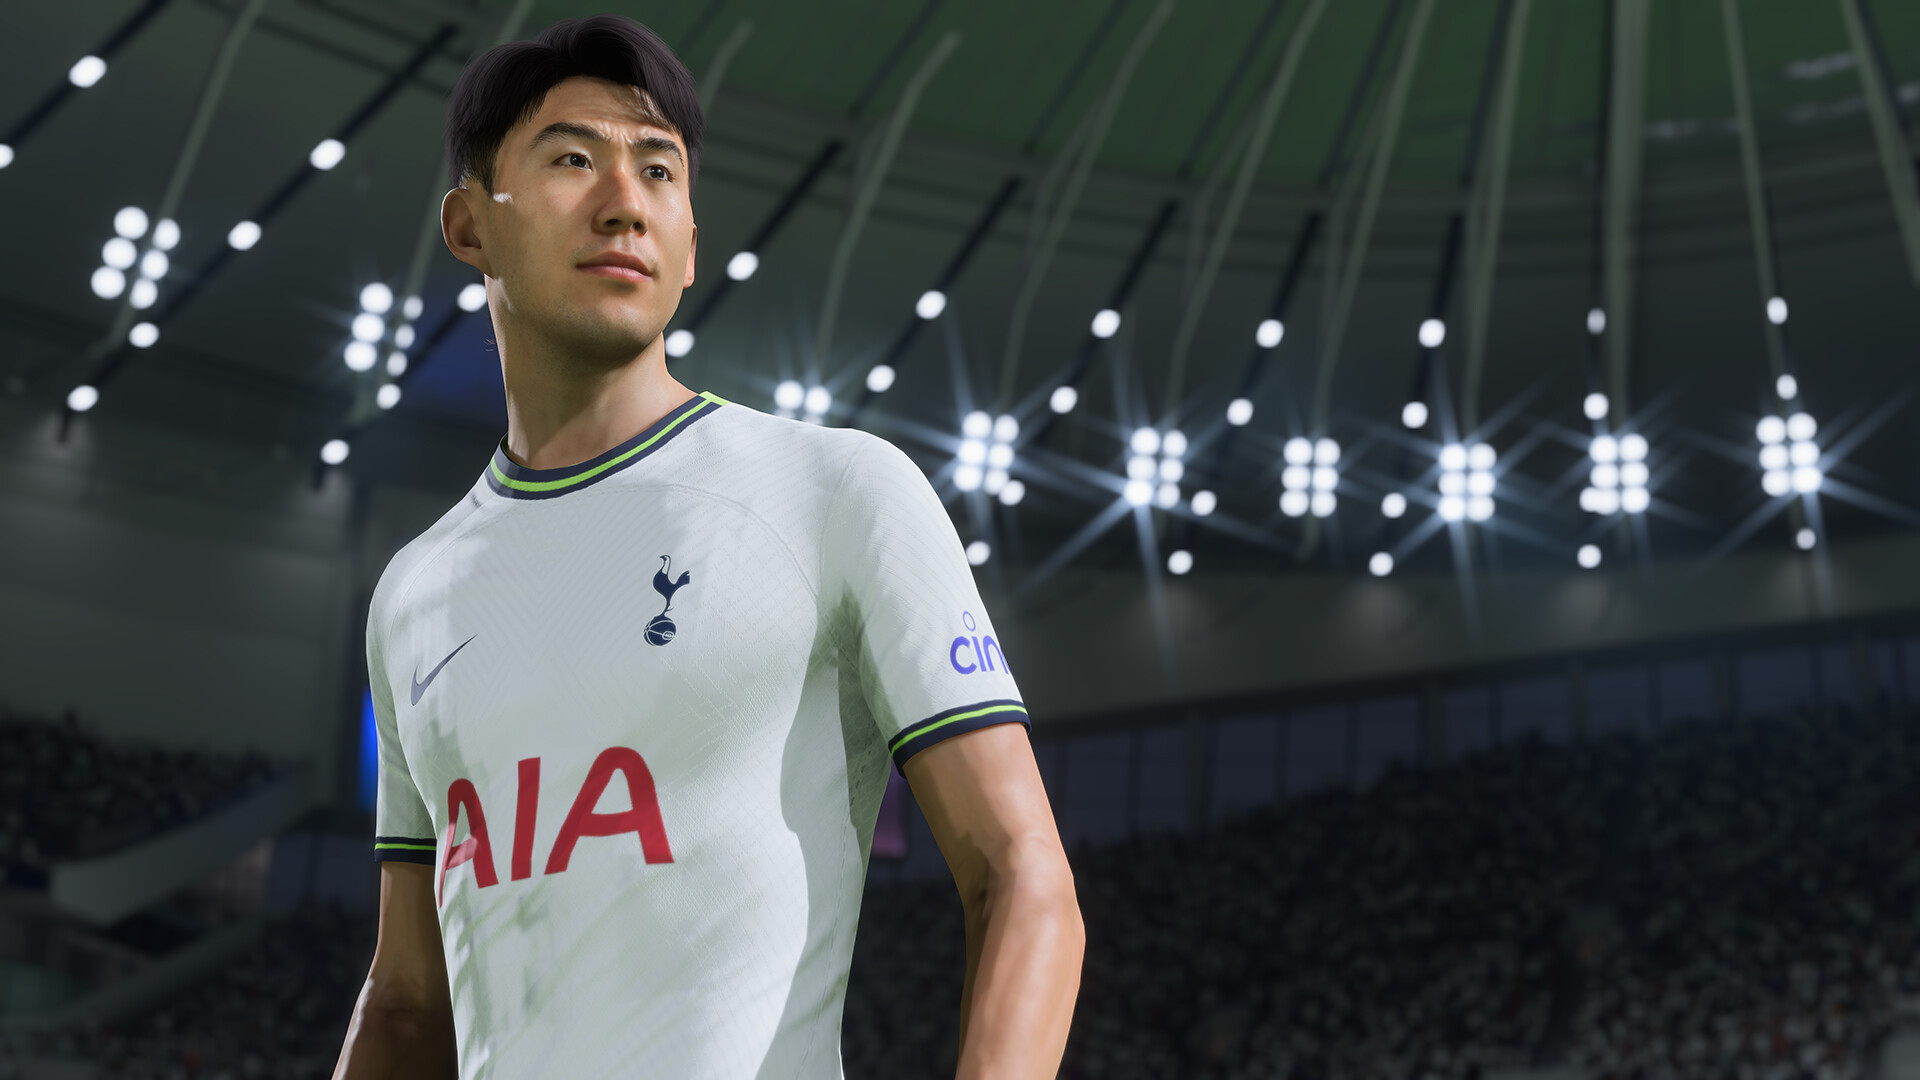 FIFA 23 Patch #5 Coming Soon to Address Gameplay, FIFA World Cup